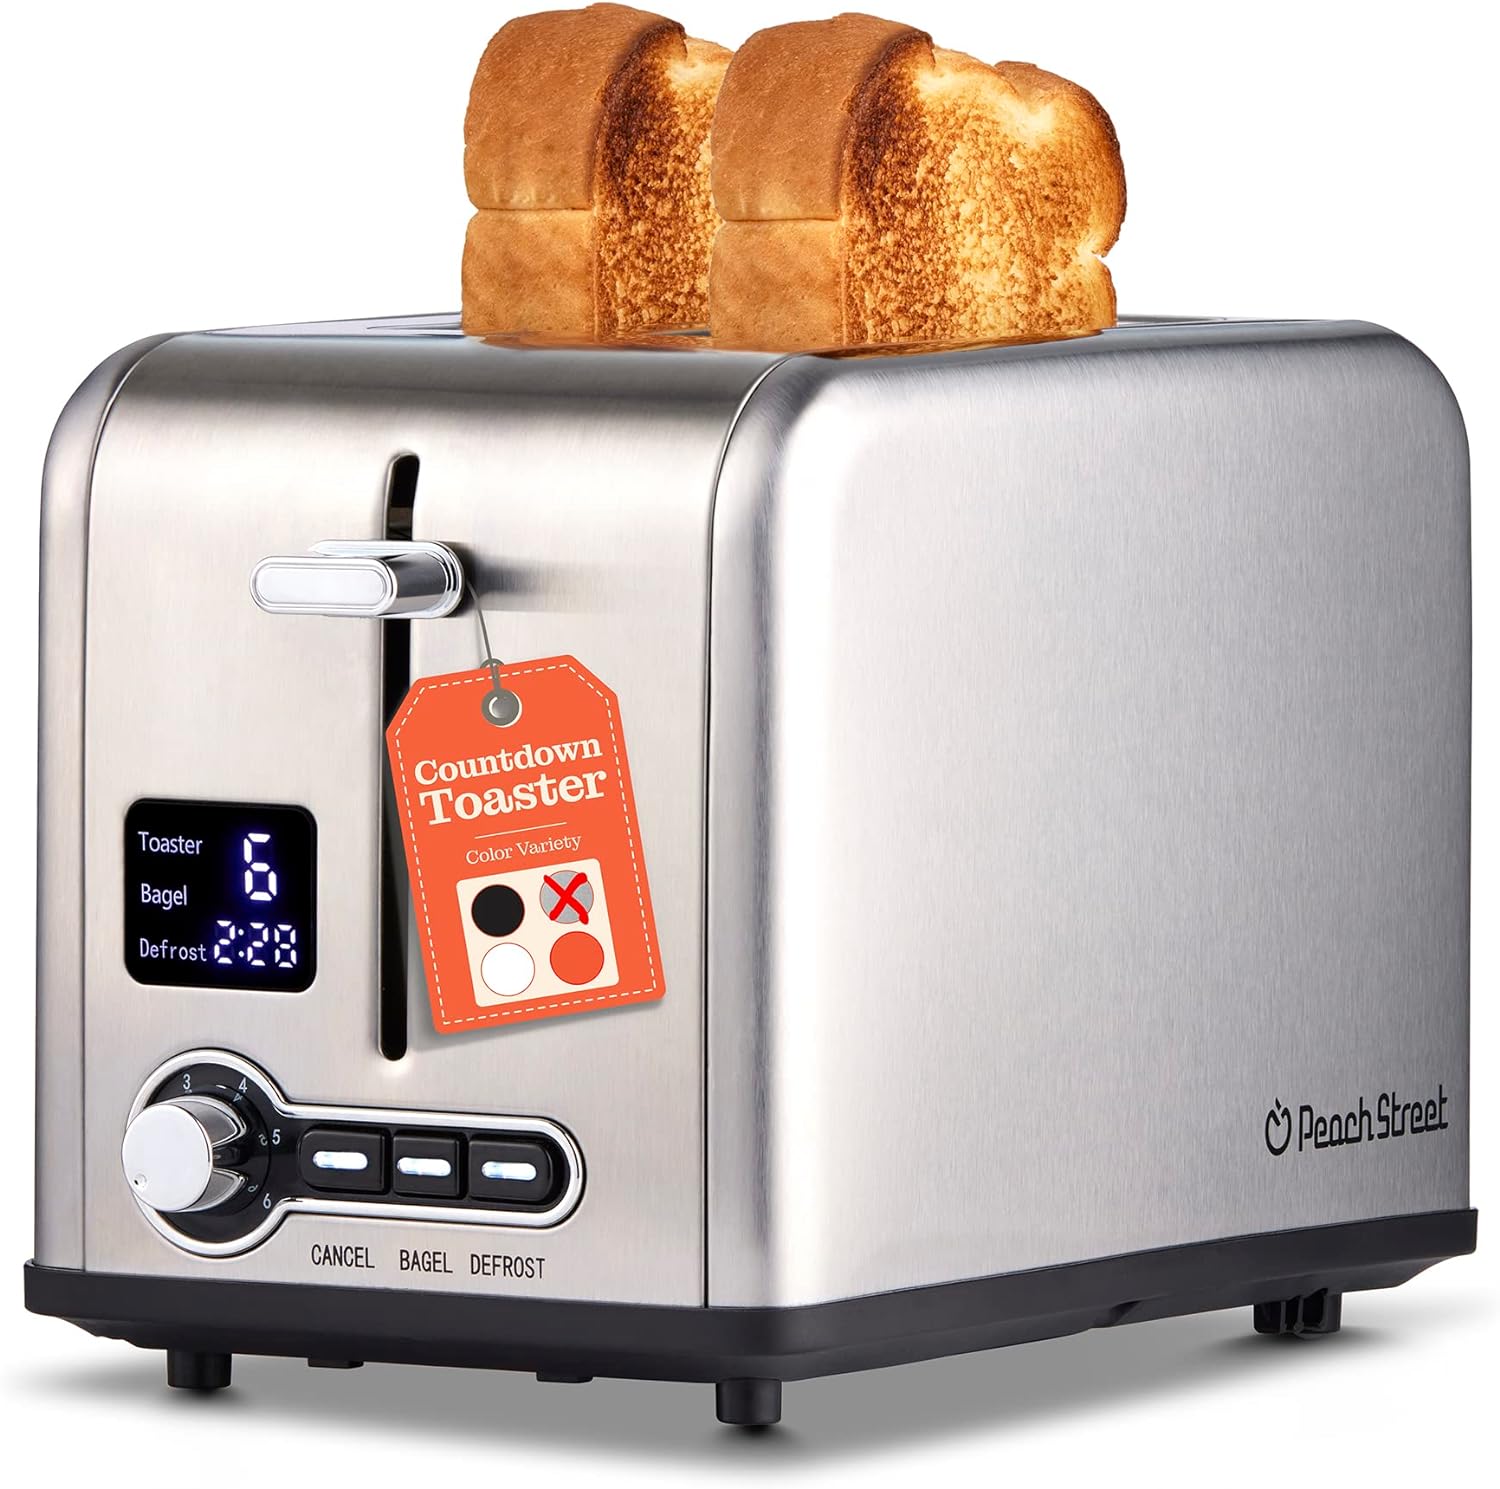 I love this toaster! It looks nice and works great. The settings are easy to understand and seem to be accurate. I especially like the countdown timer.